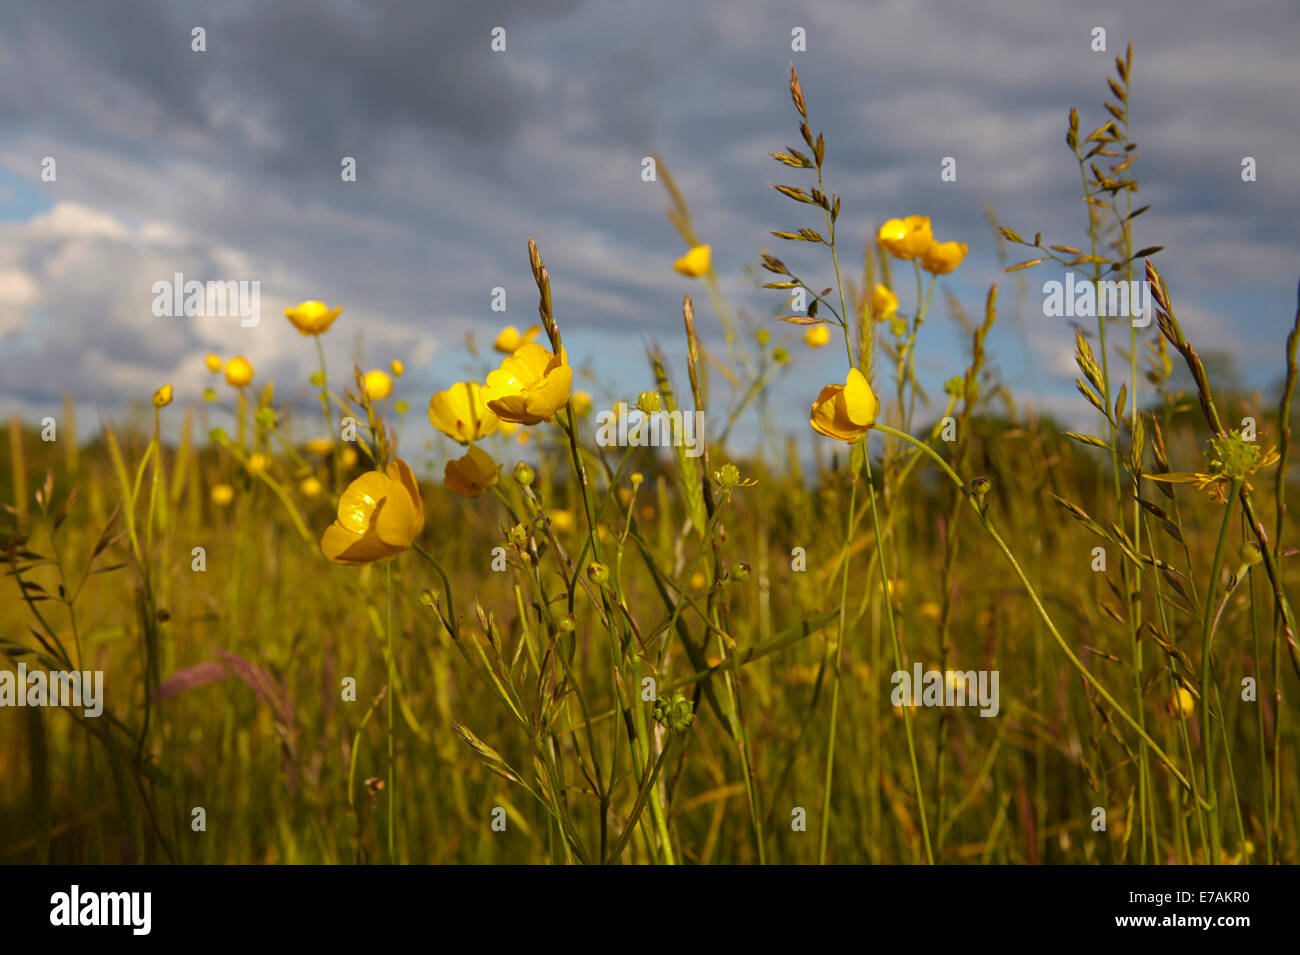 Buttercups (ranunculus) growing in an English meadow in early summer Stock Photo